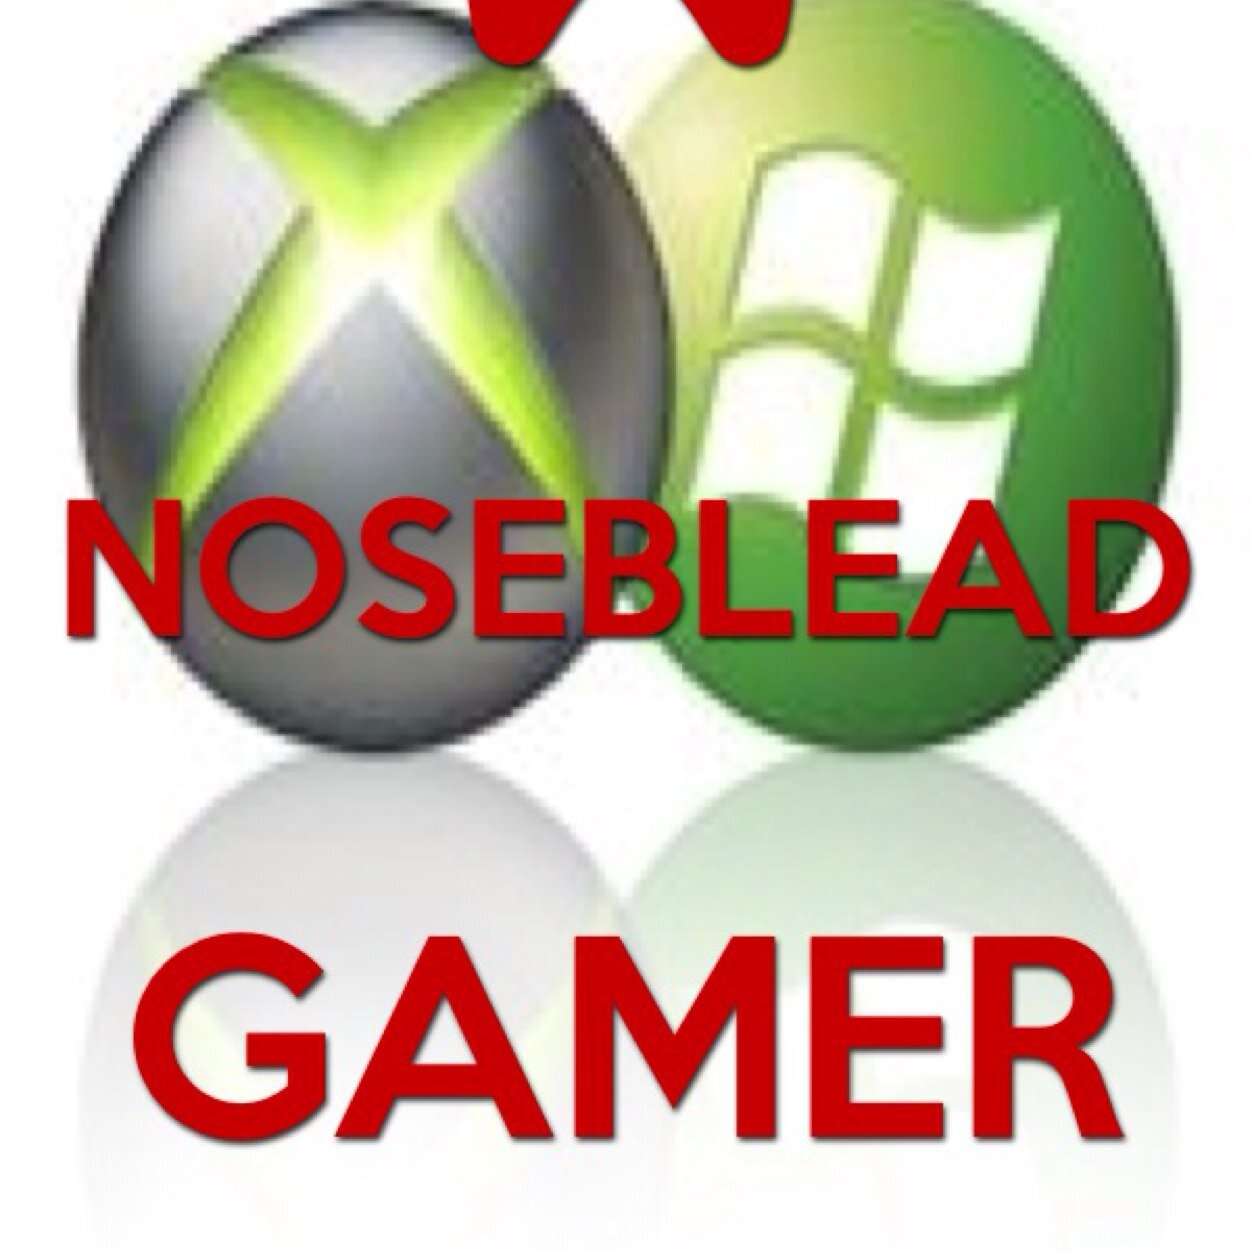 Hey guys its noseblead gamer! And welcome to my twitter. Im a fun gamer big fan of @stampycat @iballisticsquid! I love all my fans and love making youtube video